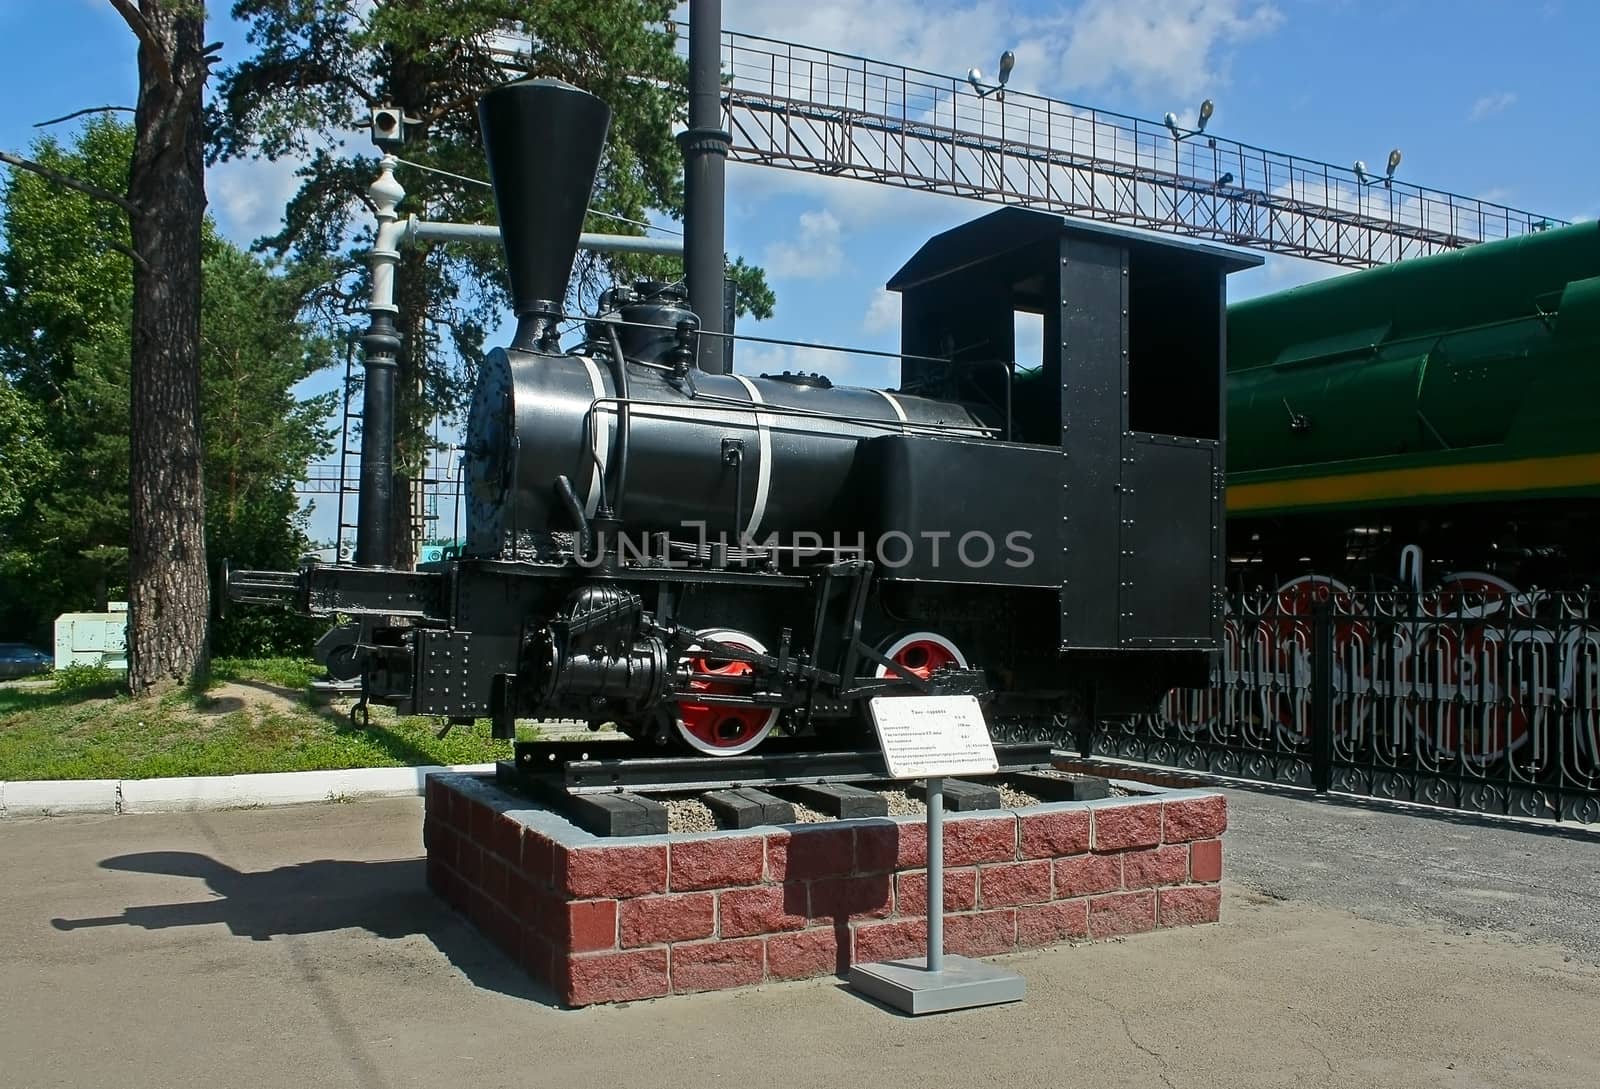 Locomotive with  steam engine is on  rails as  museum piece.